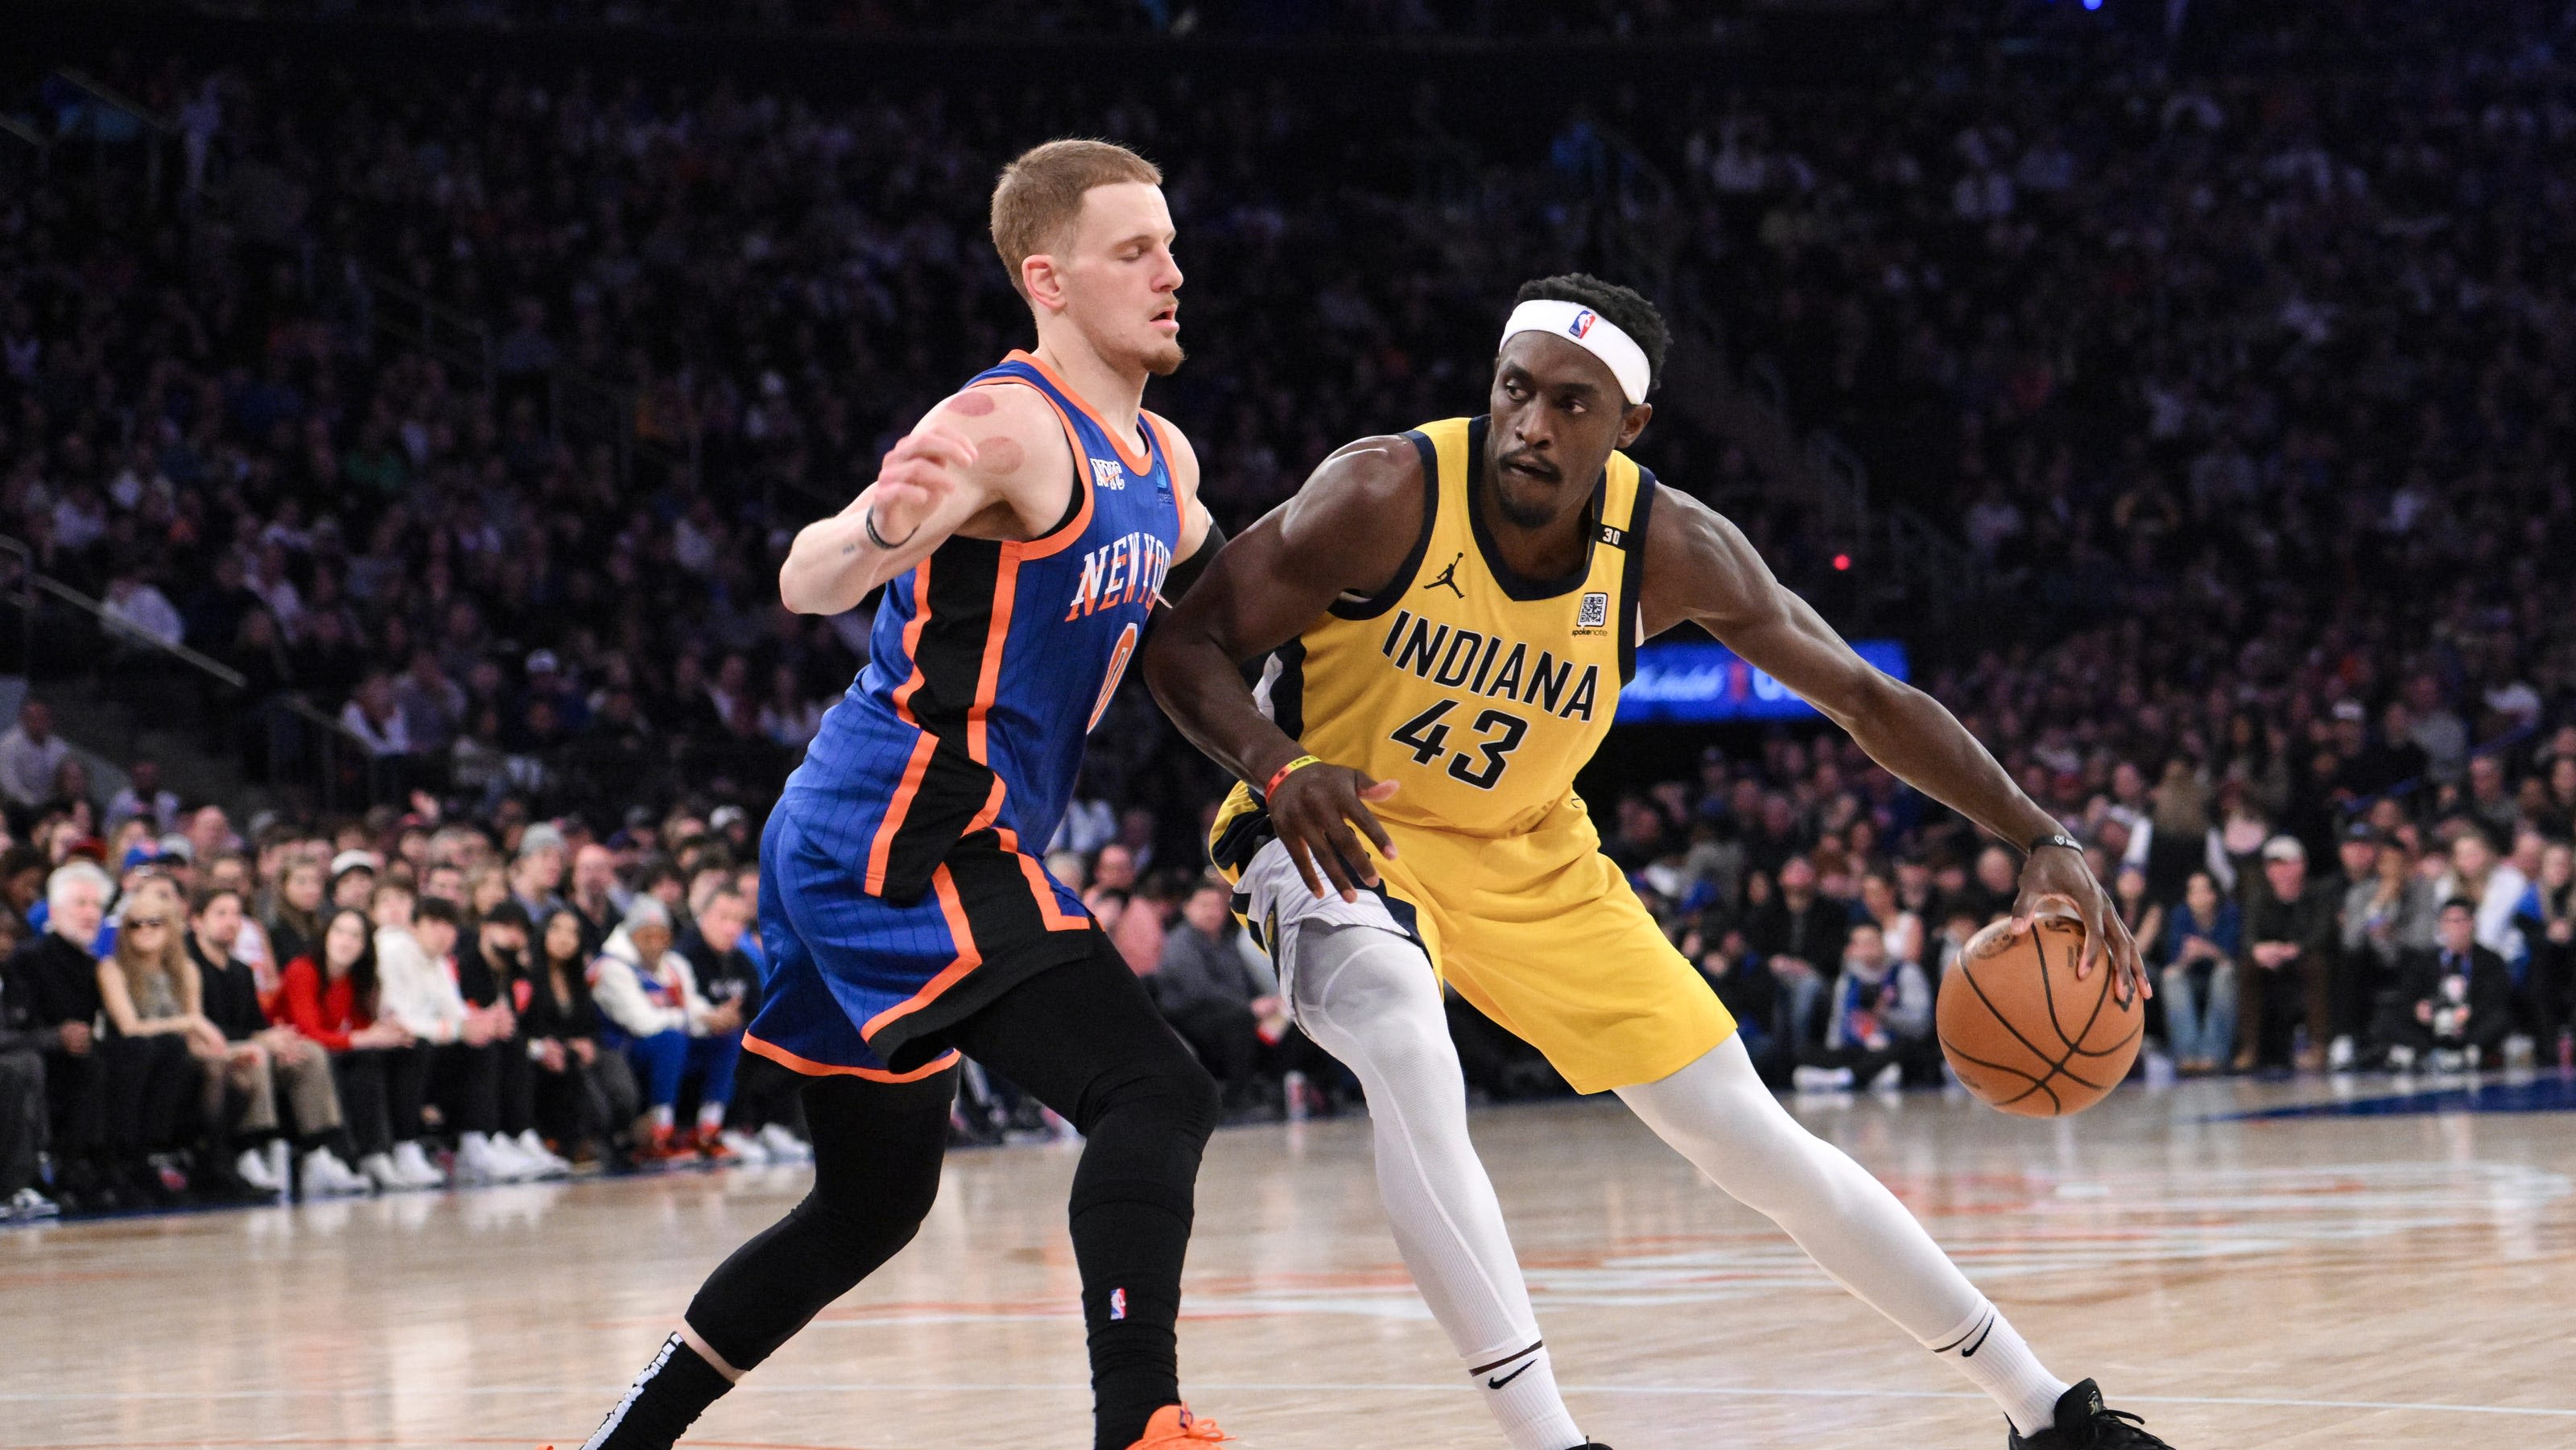 Indiana Pacers vs New York Knicks picks, predictions, odds: Who wins NBA Playoffs series?